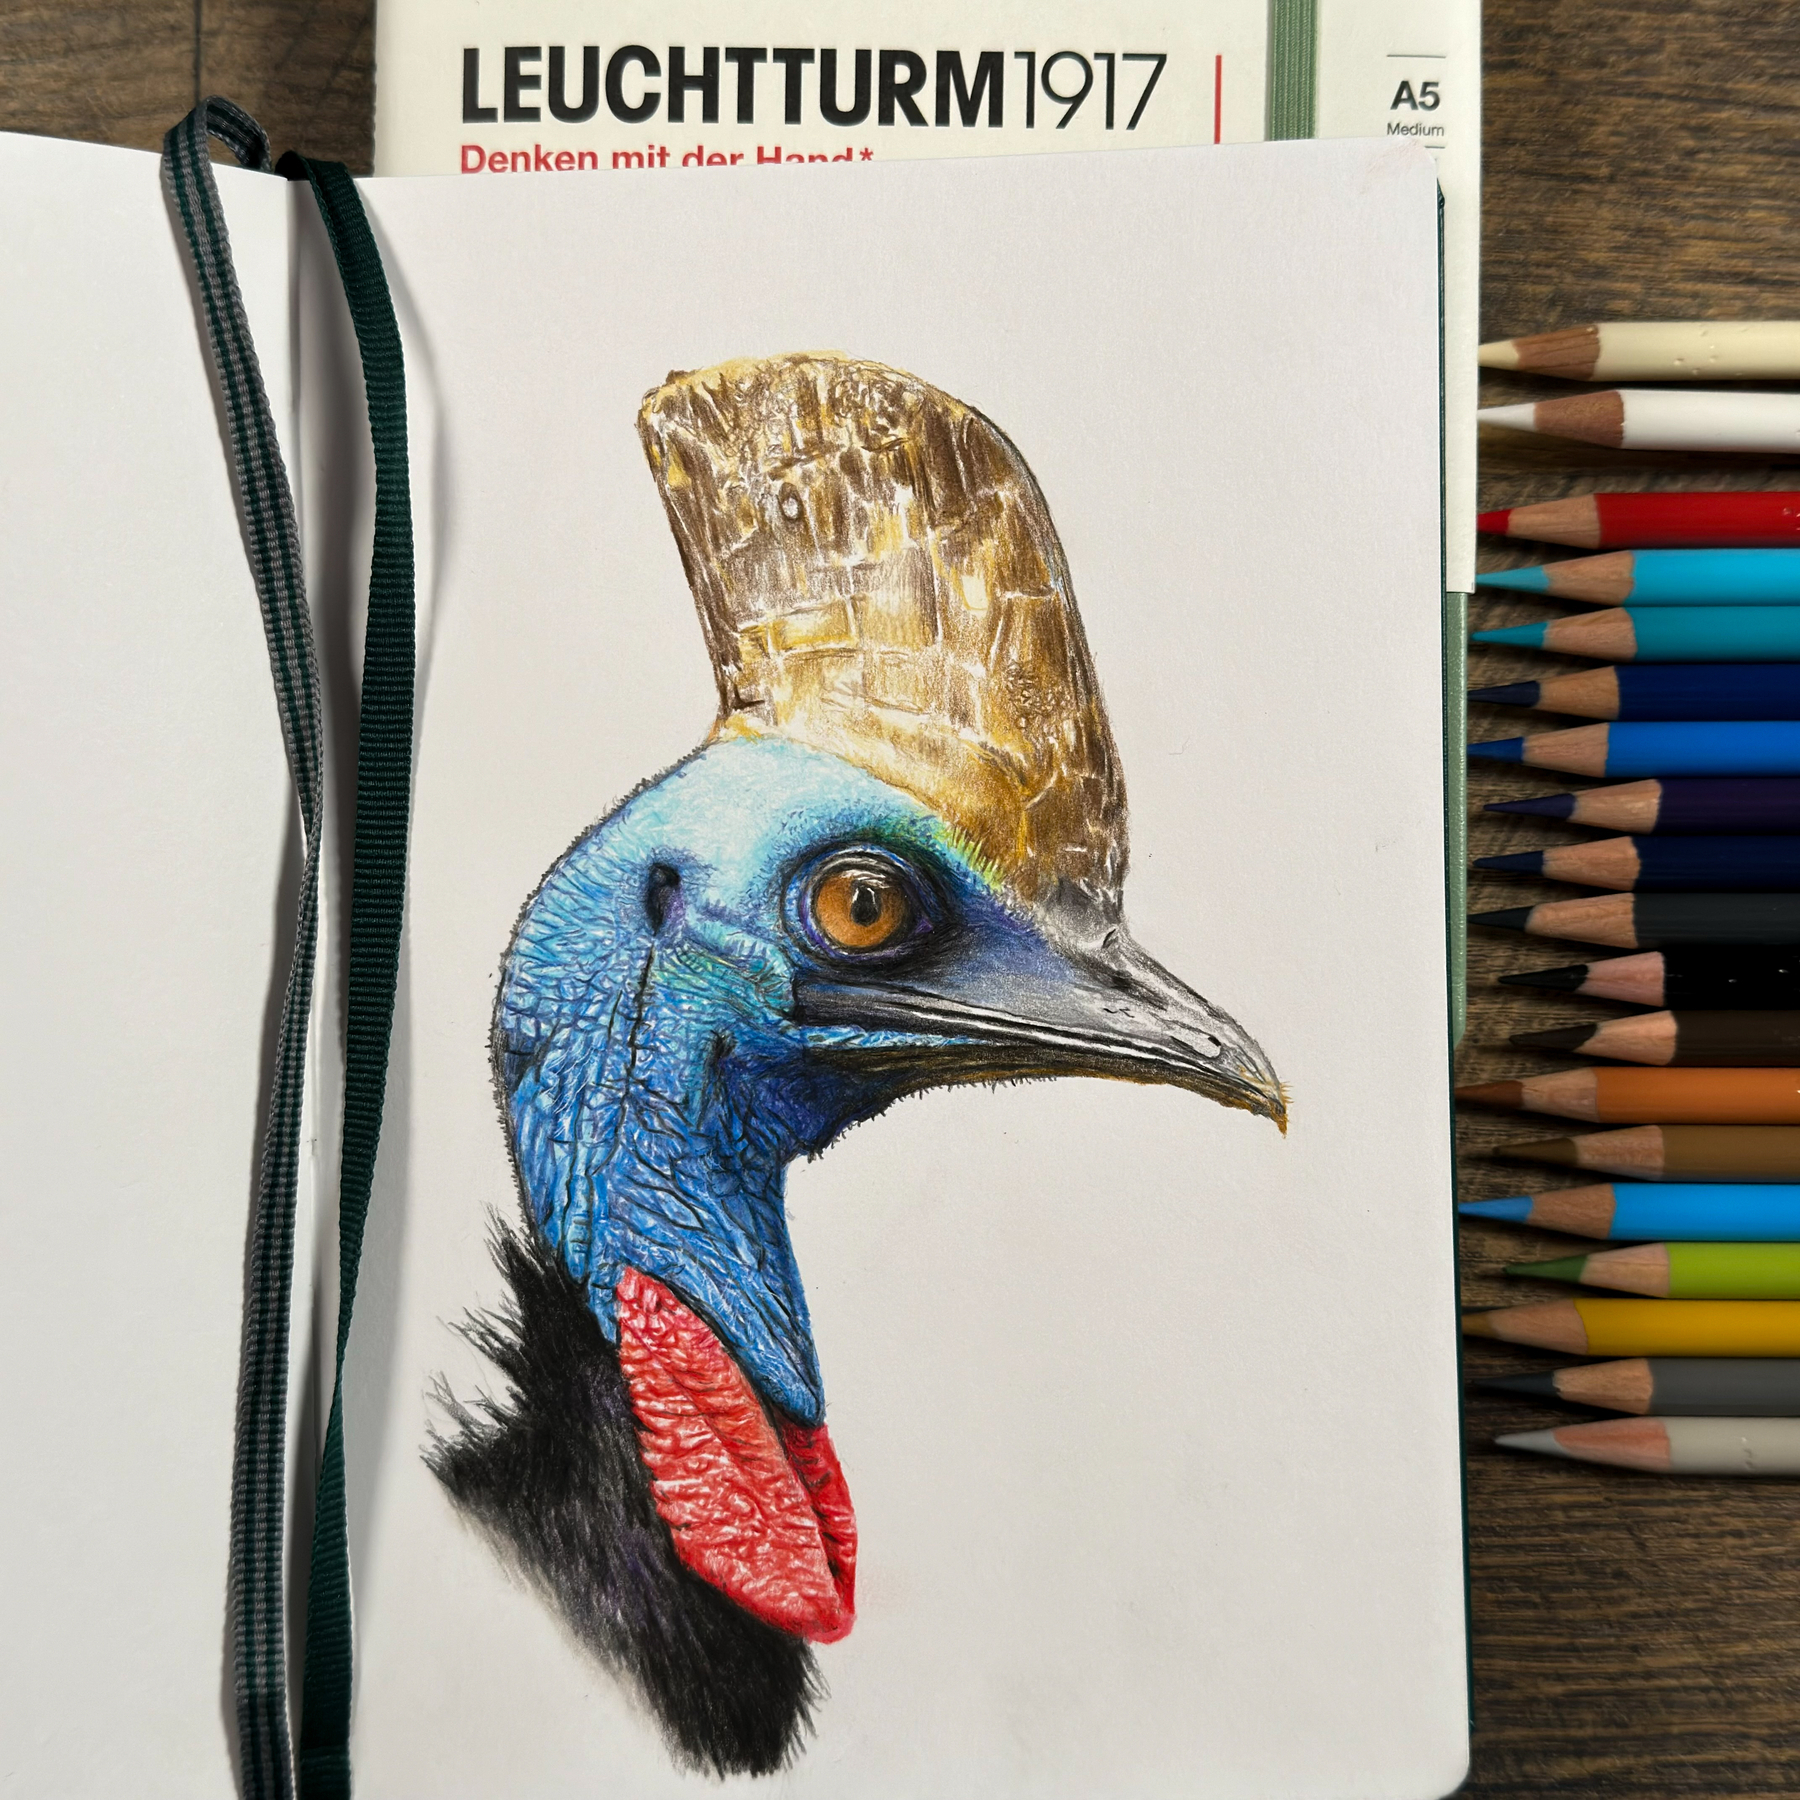 A detailed colored pencil drawing of a Cassowary bird in a Leuchtturm notebook. The bird features a striking blue head, a brown casque, and vivid red wattles, with two colored pencils beside the drawing.